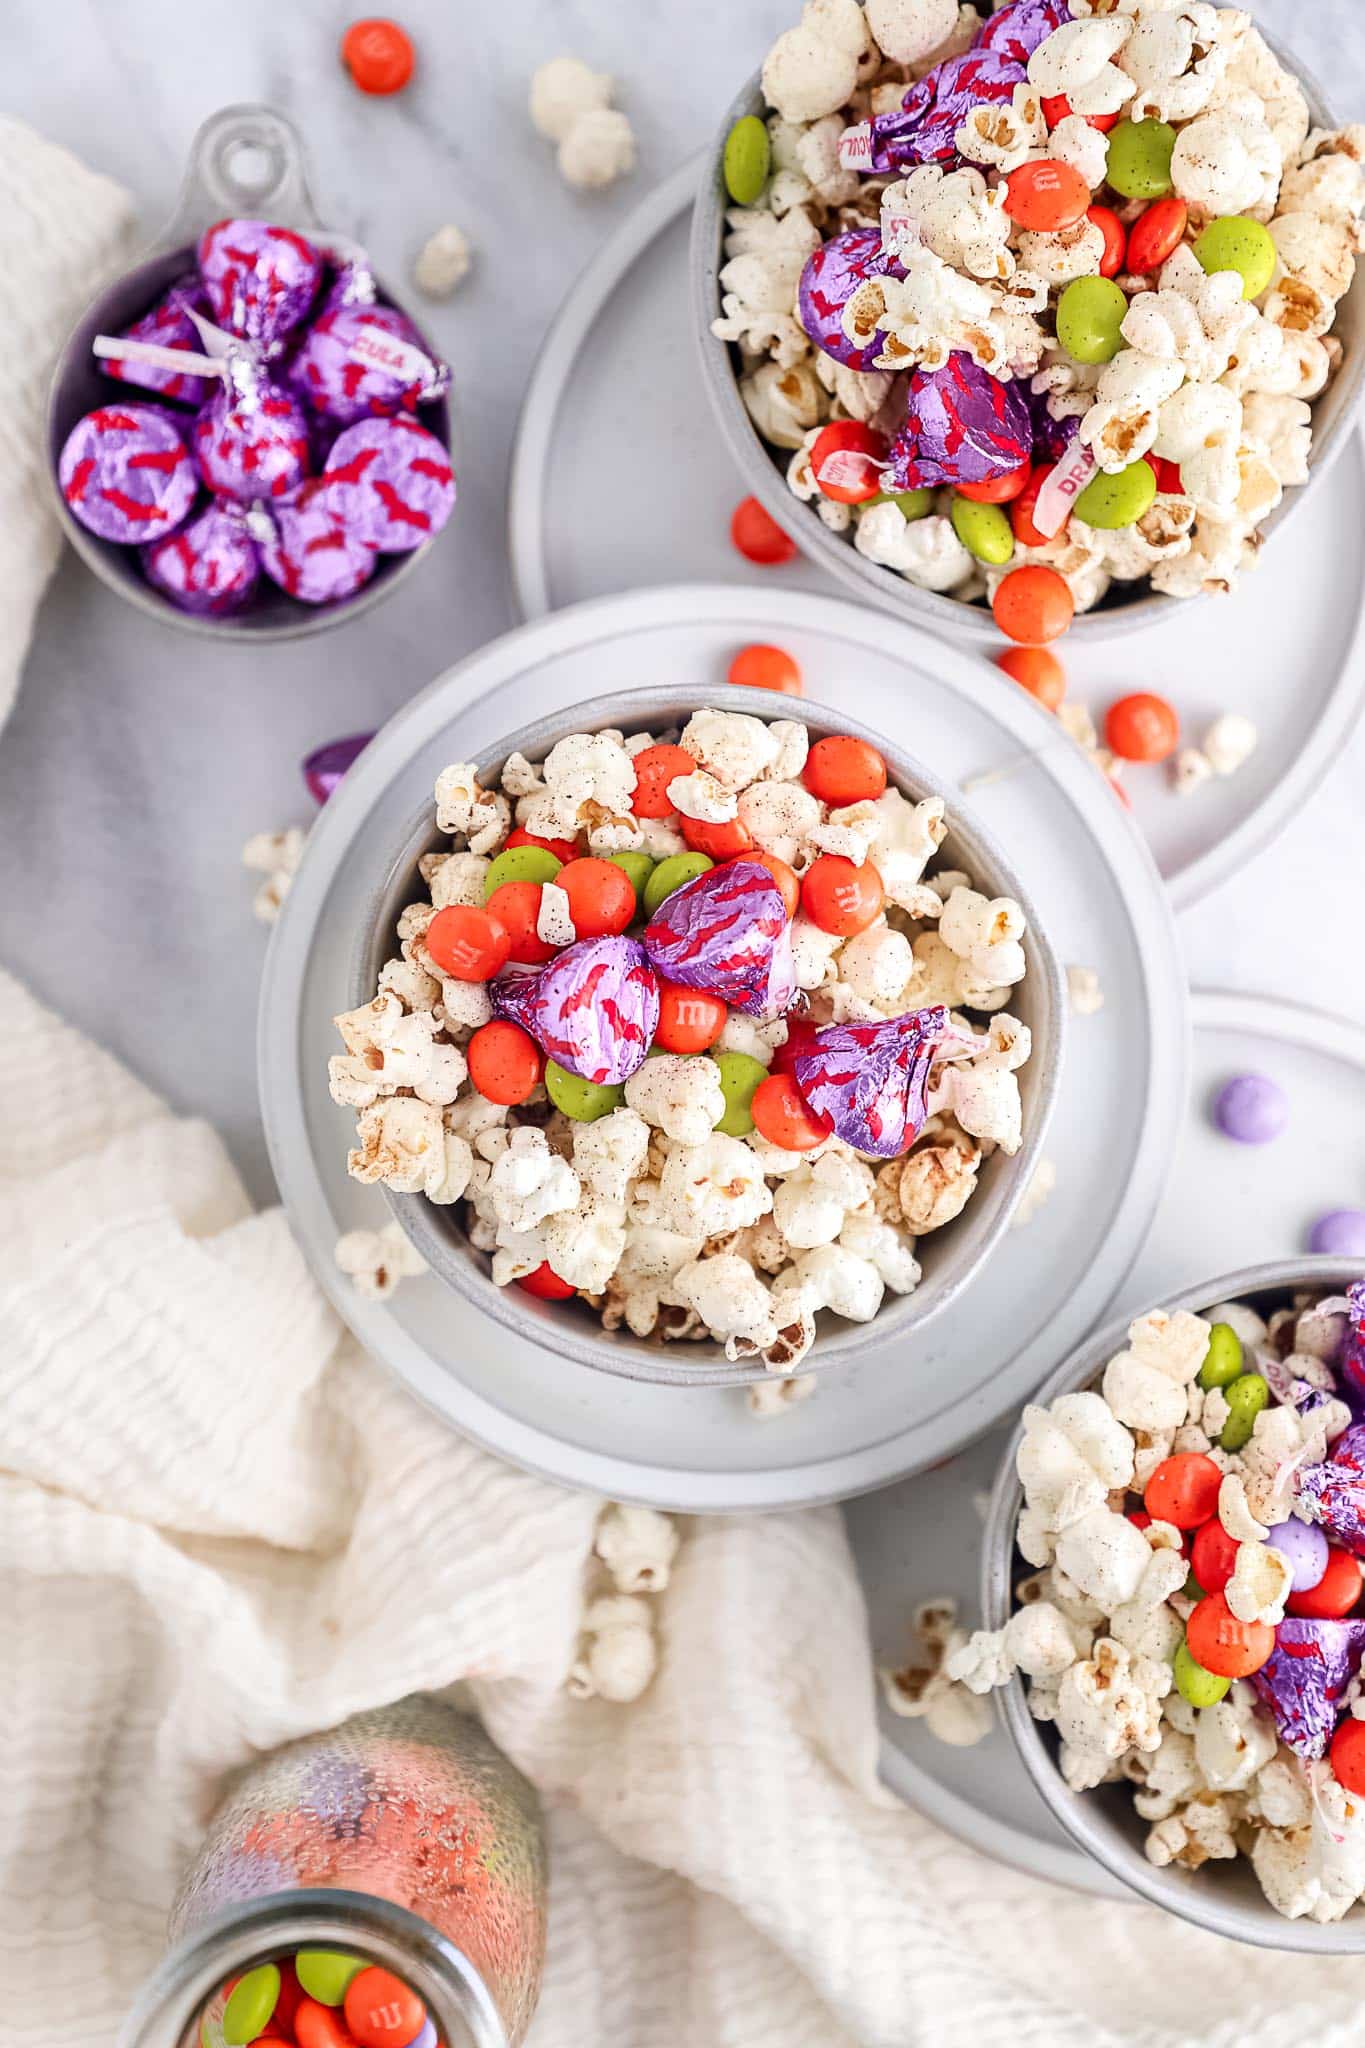 halloween snack mix recipes, 12 Best Halloween Party Snack Mix Recipes (Gluten Free)